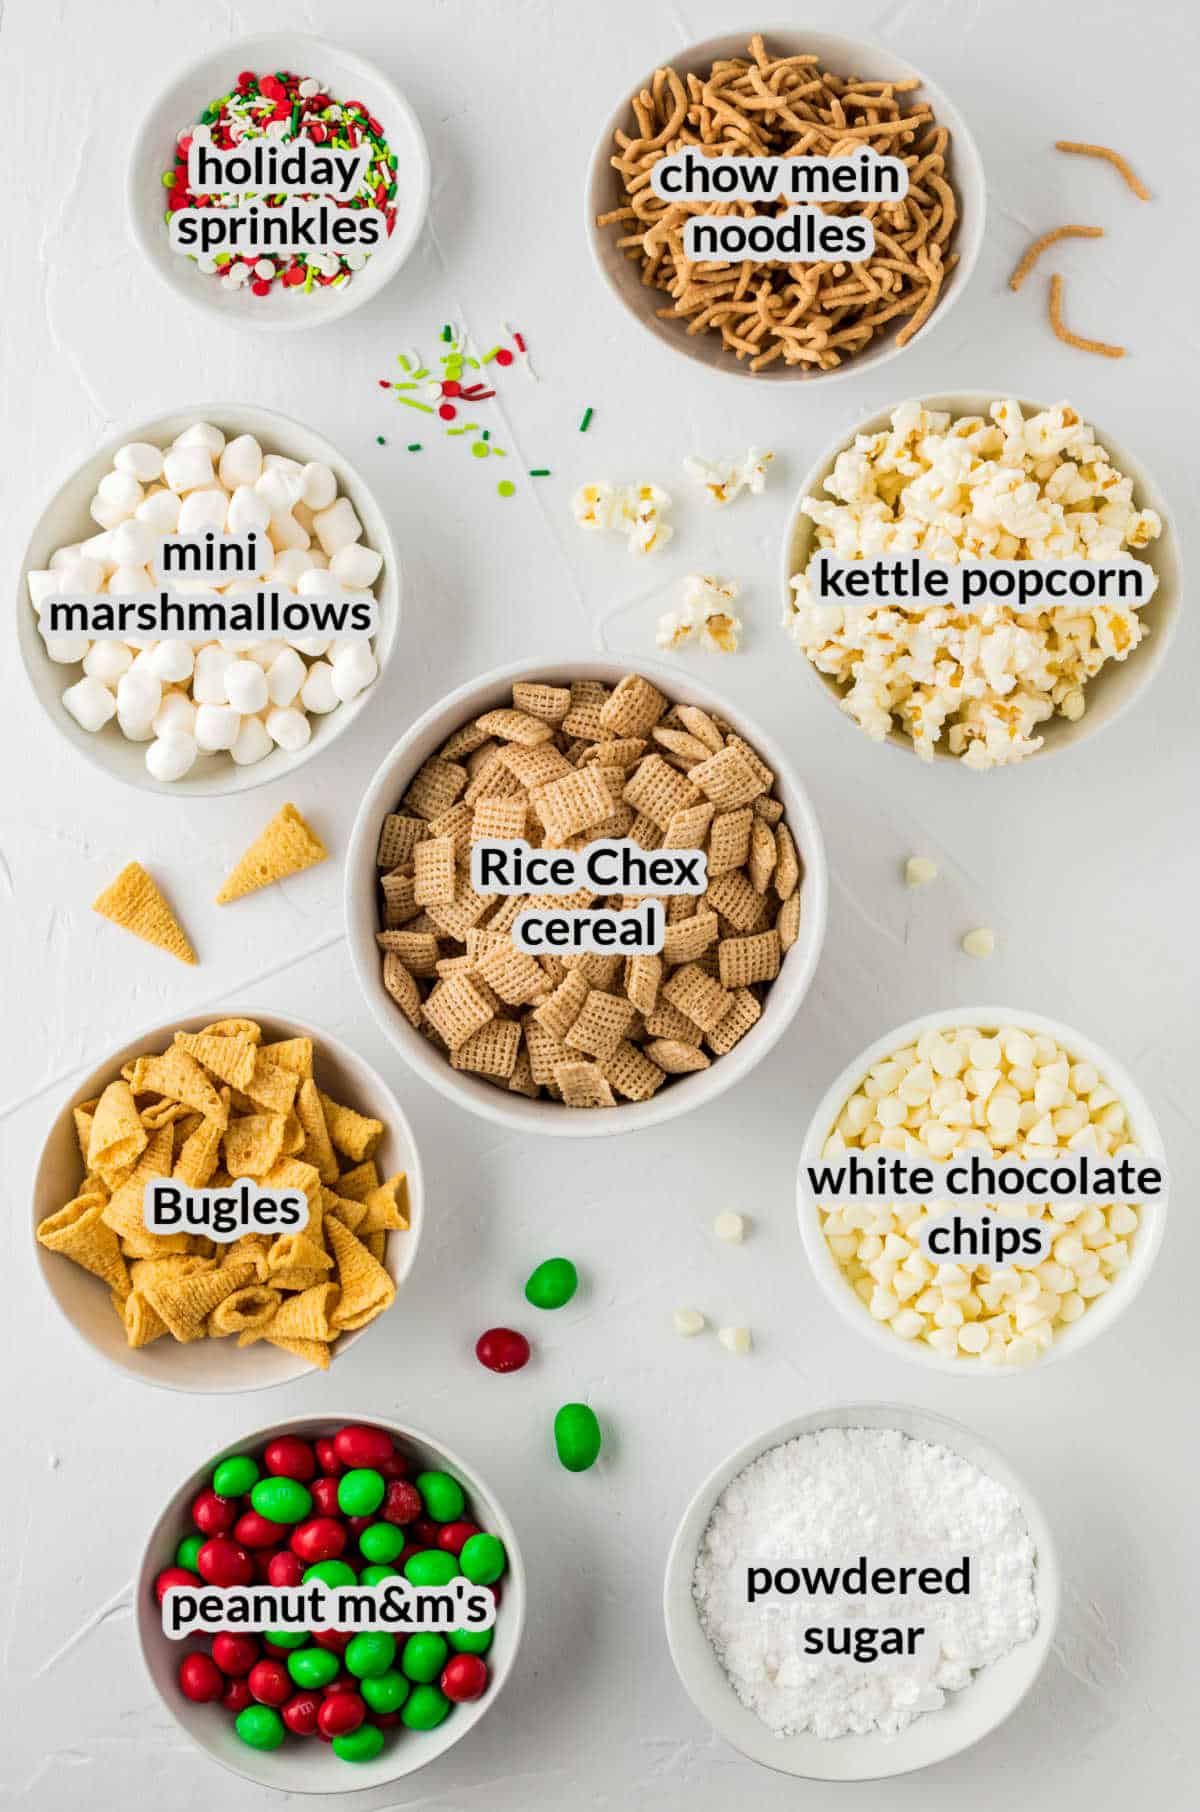 Overhead Image of the Buddy the Elf Snack Mix Ingredients